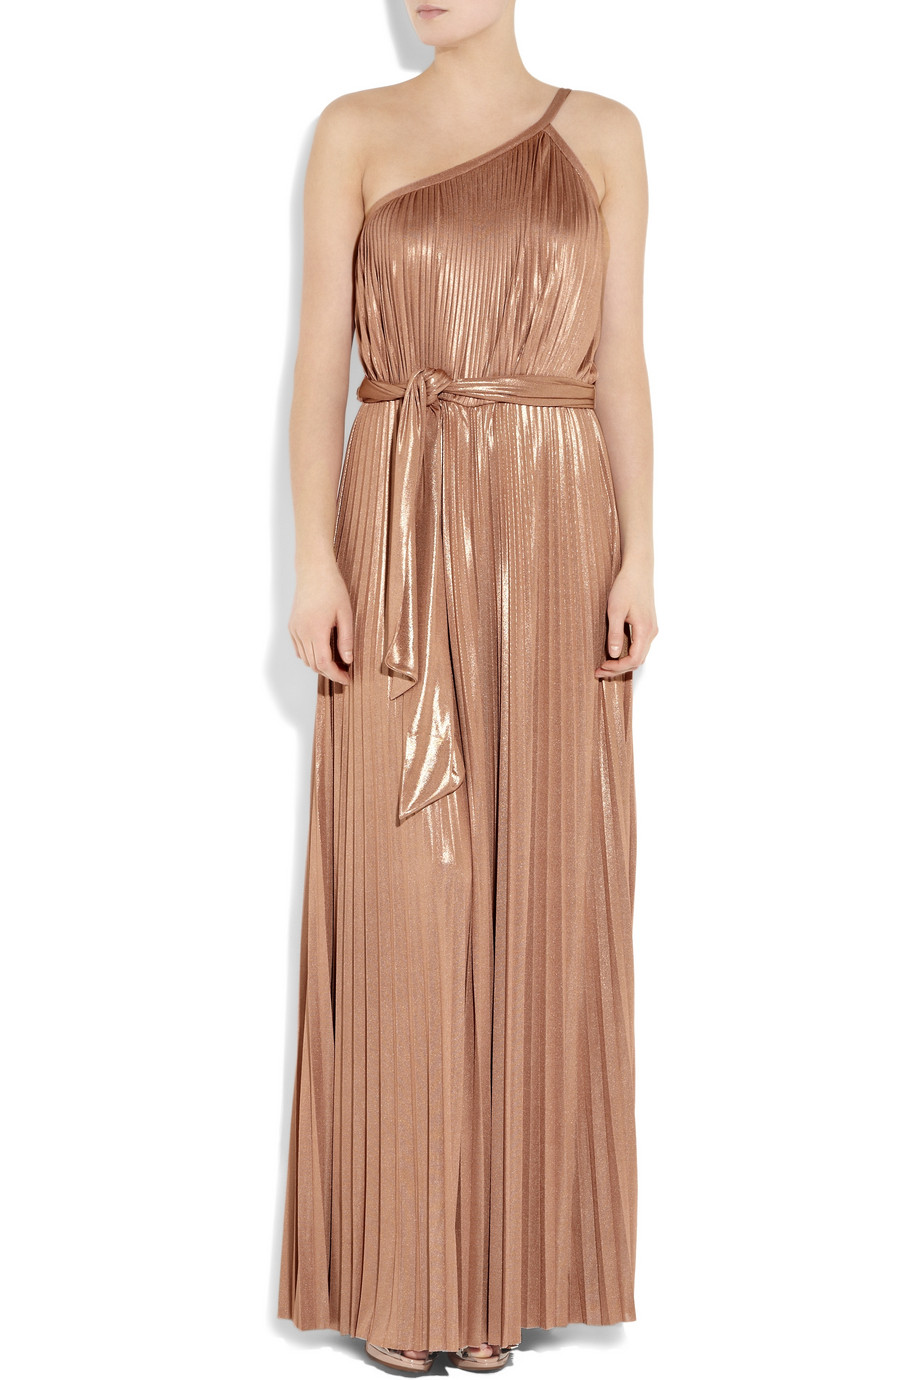 Halston Pleated One Shoulder Maxi Dress in Rose (Pink) - Lyst